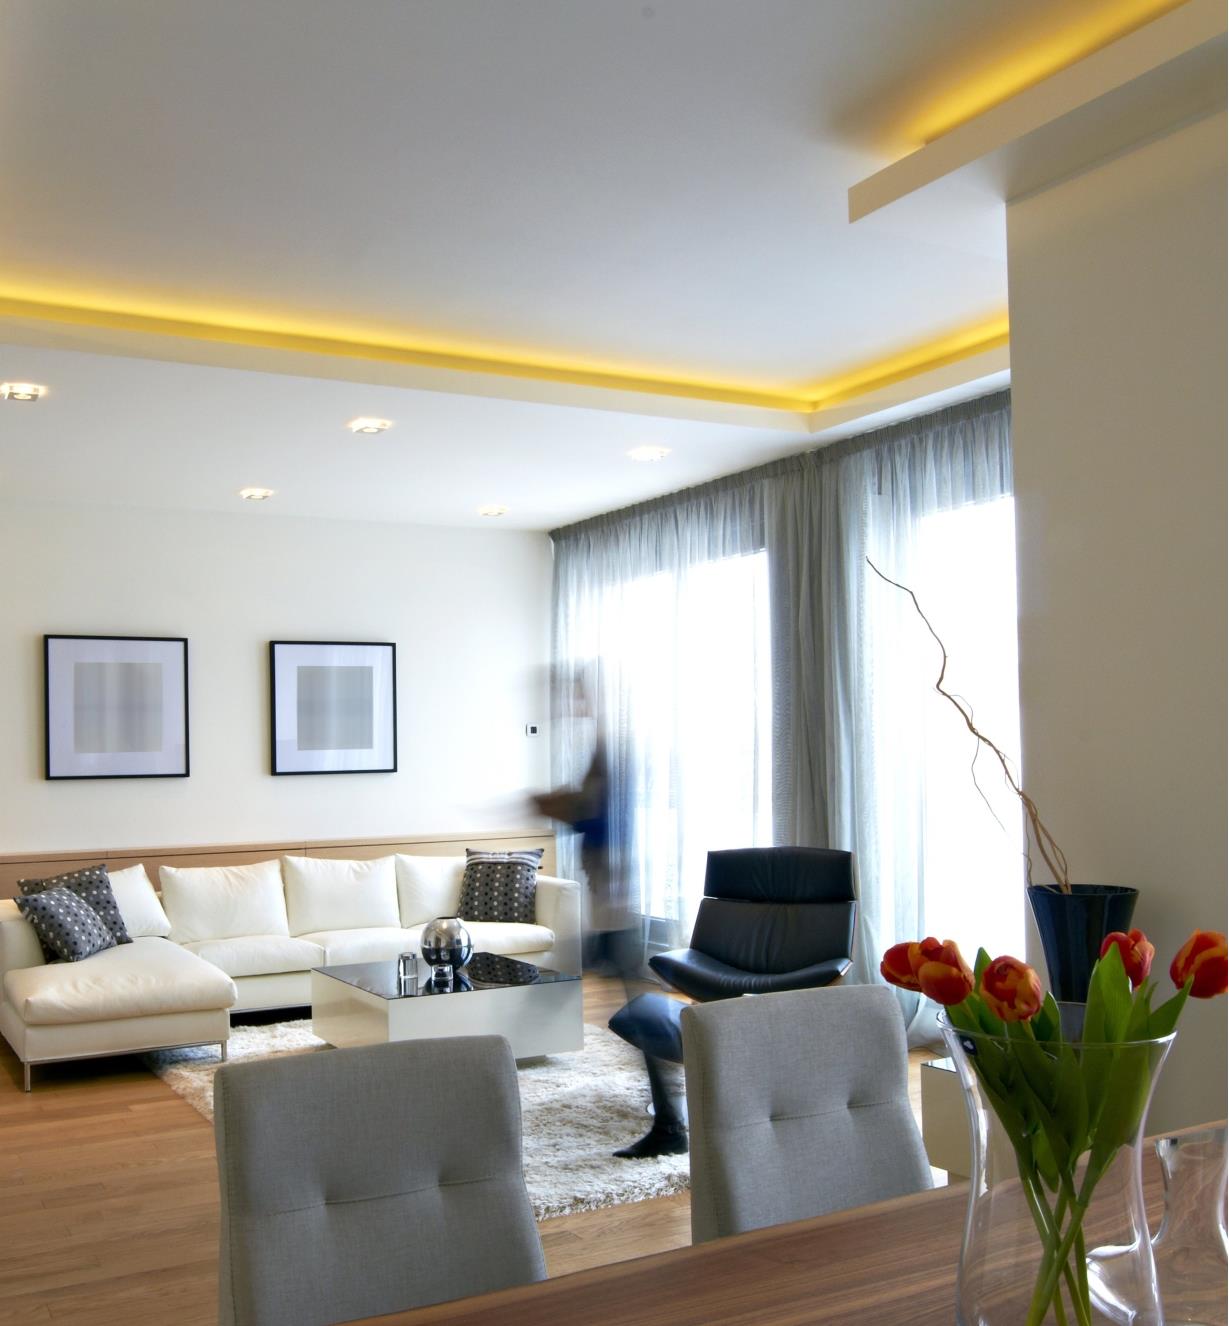 A living room with an inset ceiling illuminated by indirect lighting along its edges